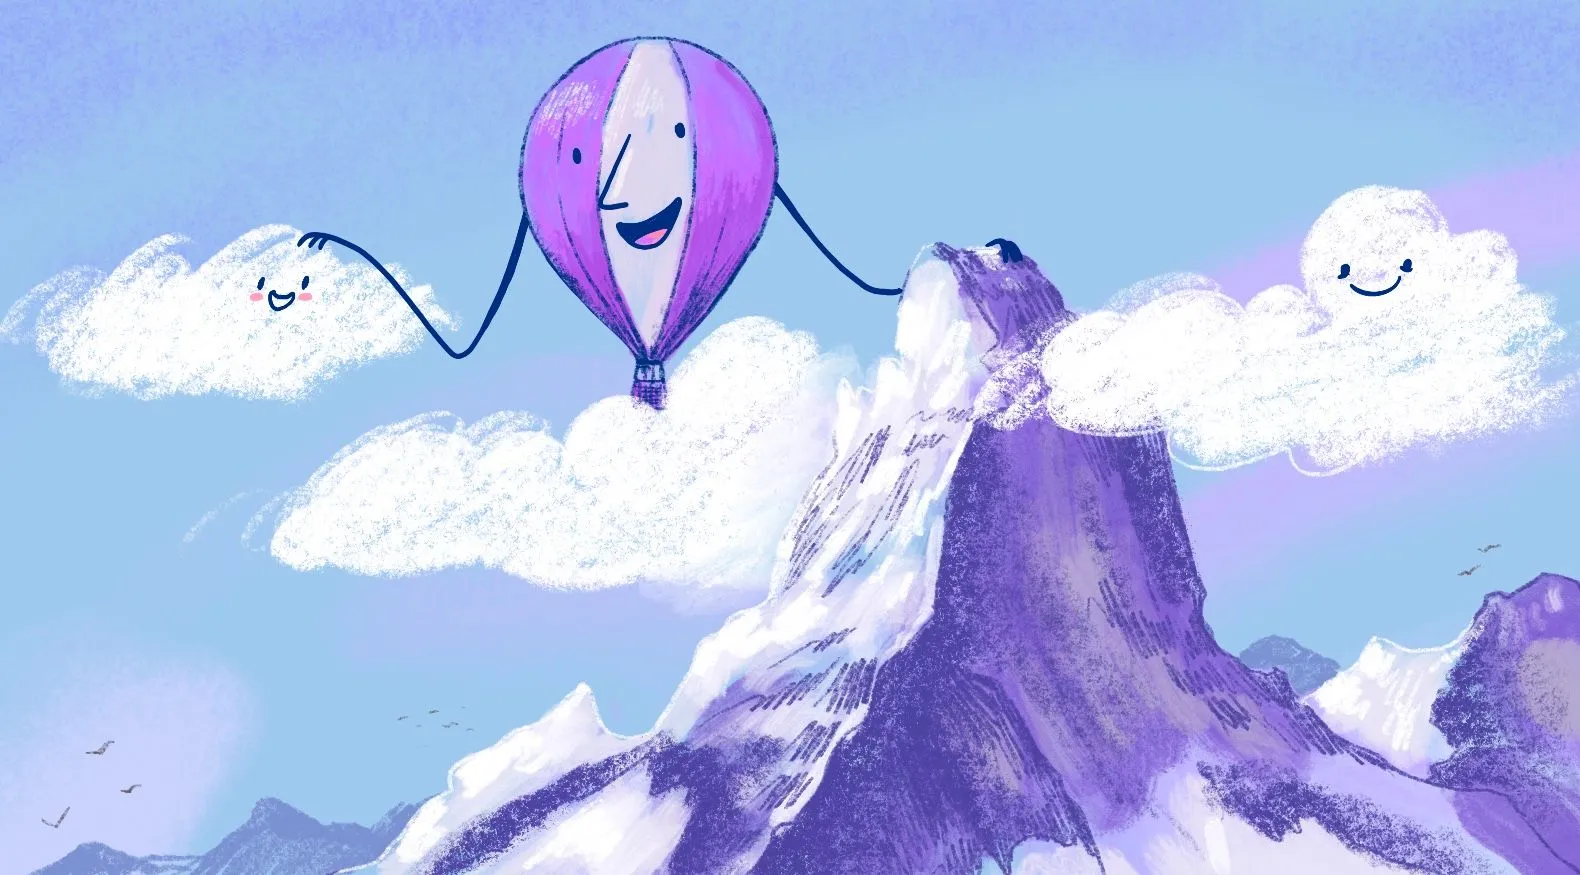 A purple hot air balloon chatting happily with clouds above a mountain range